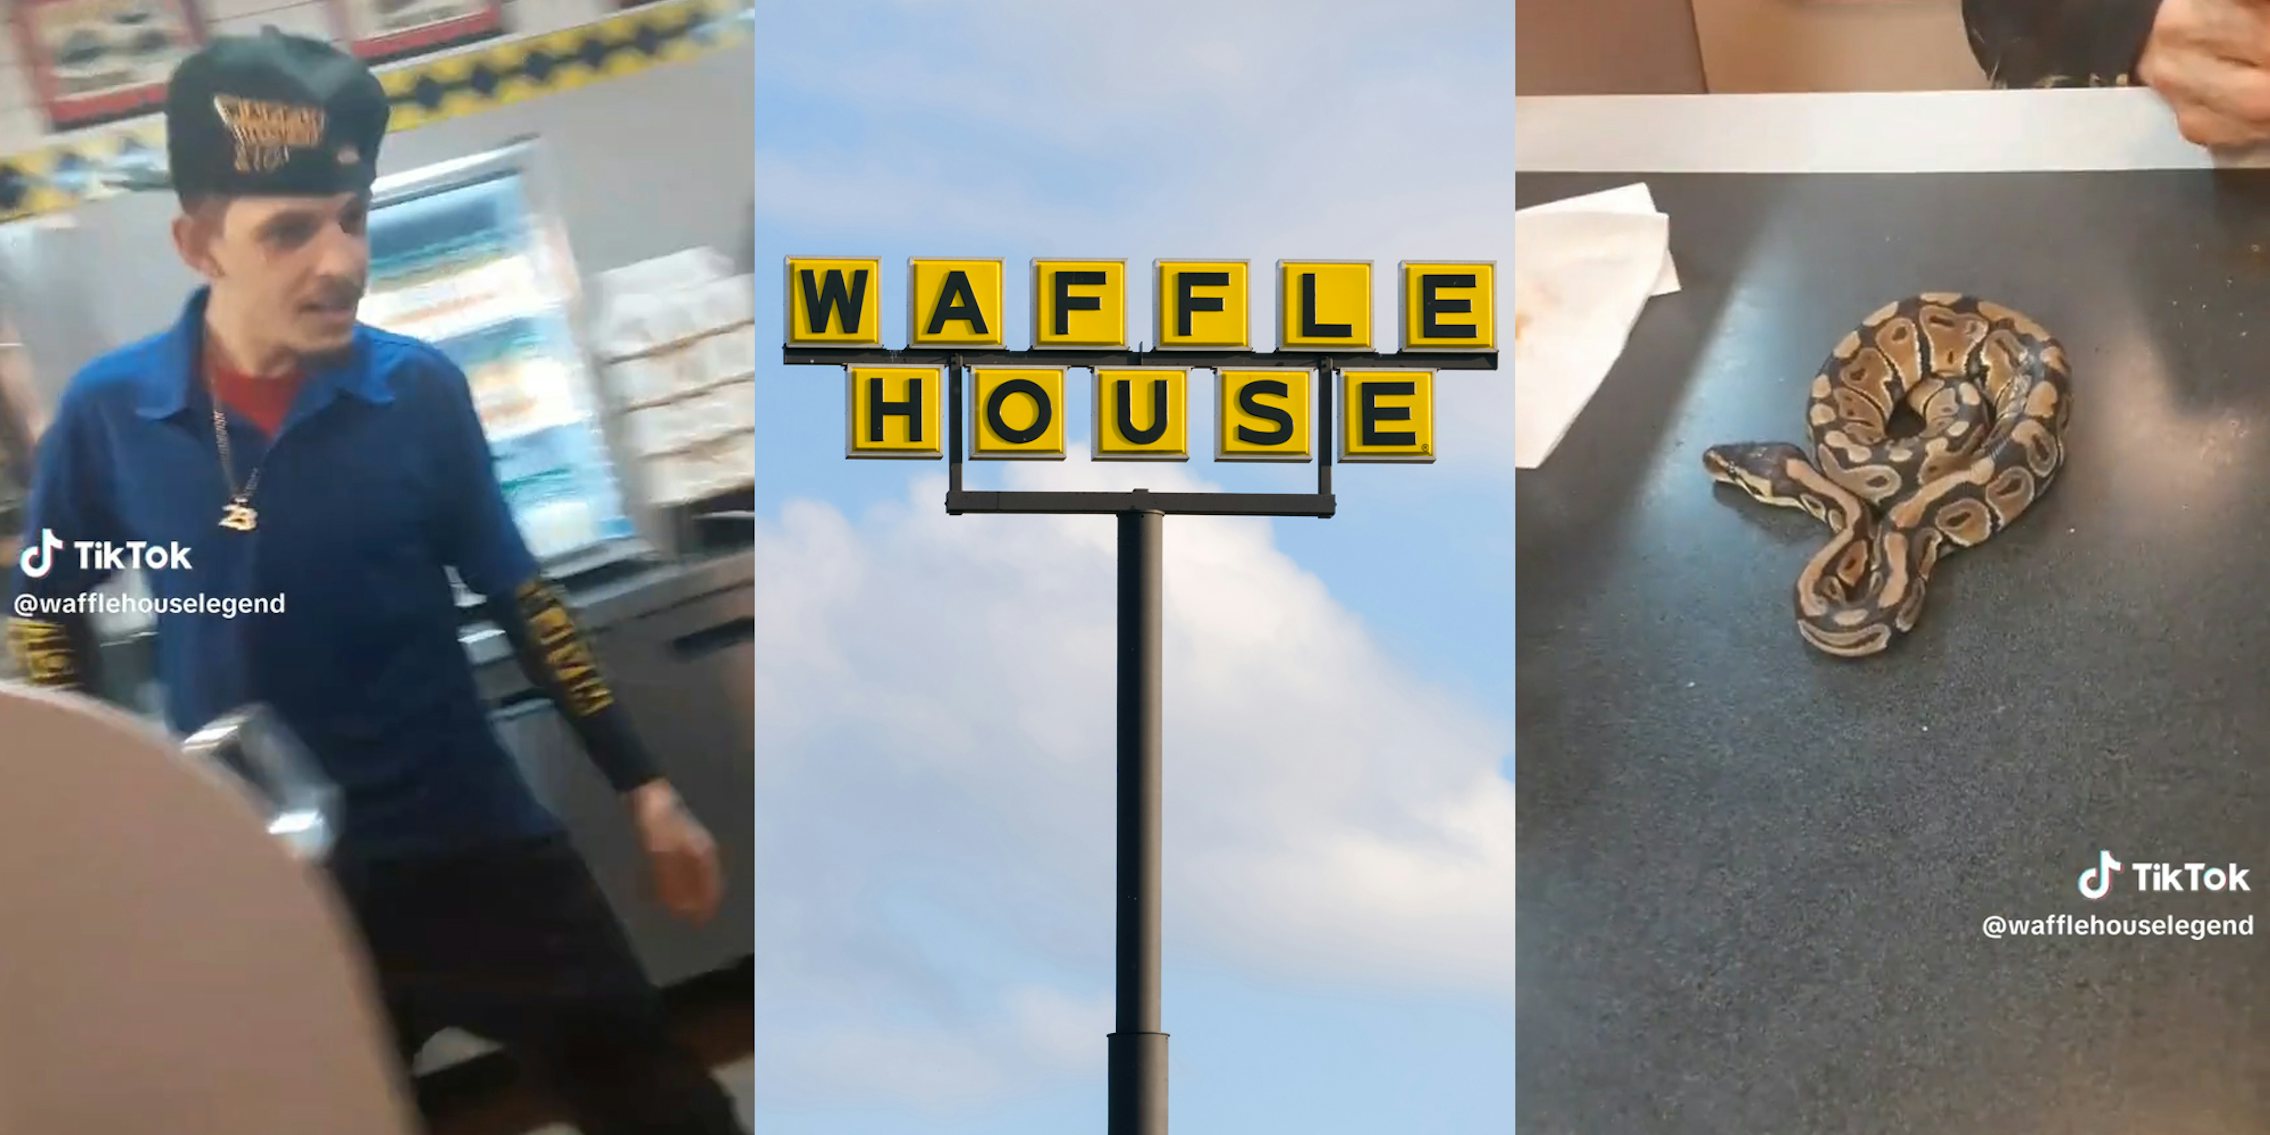 waffle house worker (l) waffle house sign (c) snake on table (r)